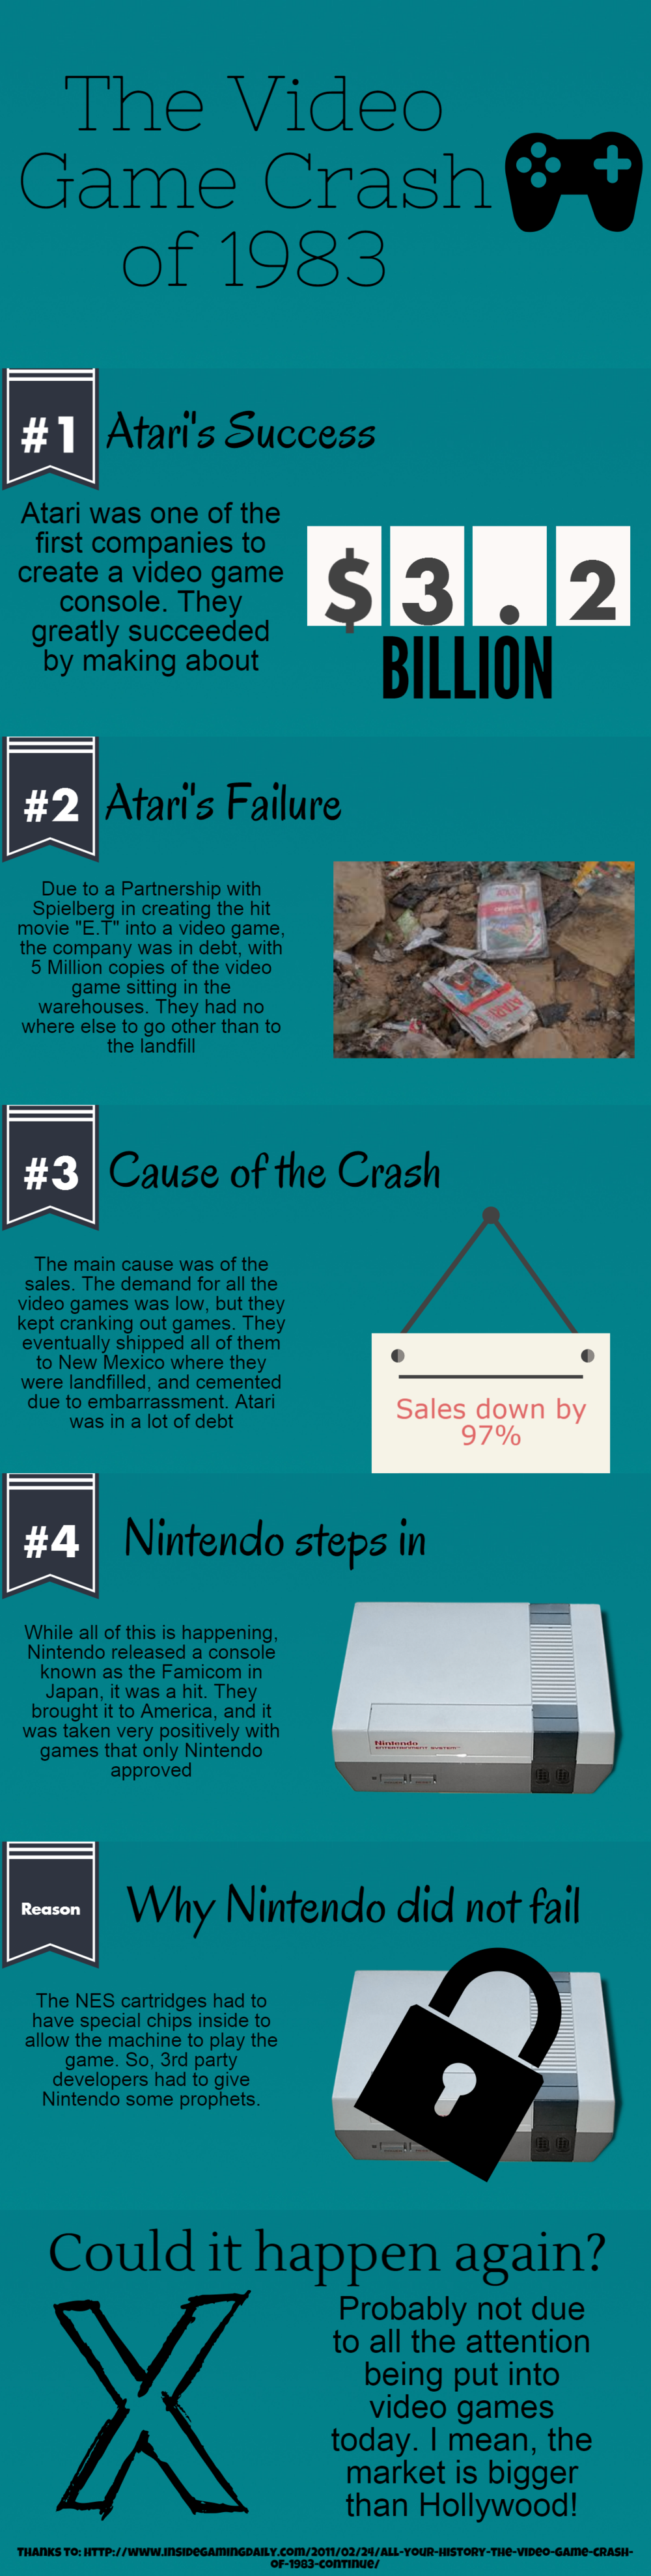 Infographic created by Zac Delane on piktochart.com